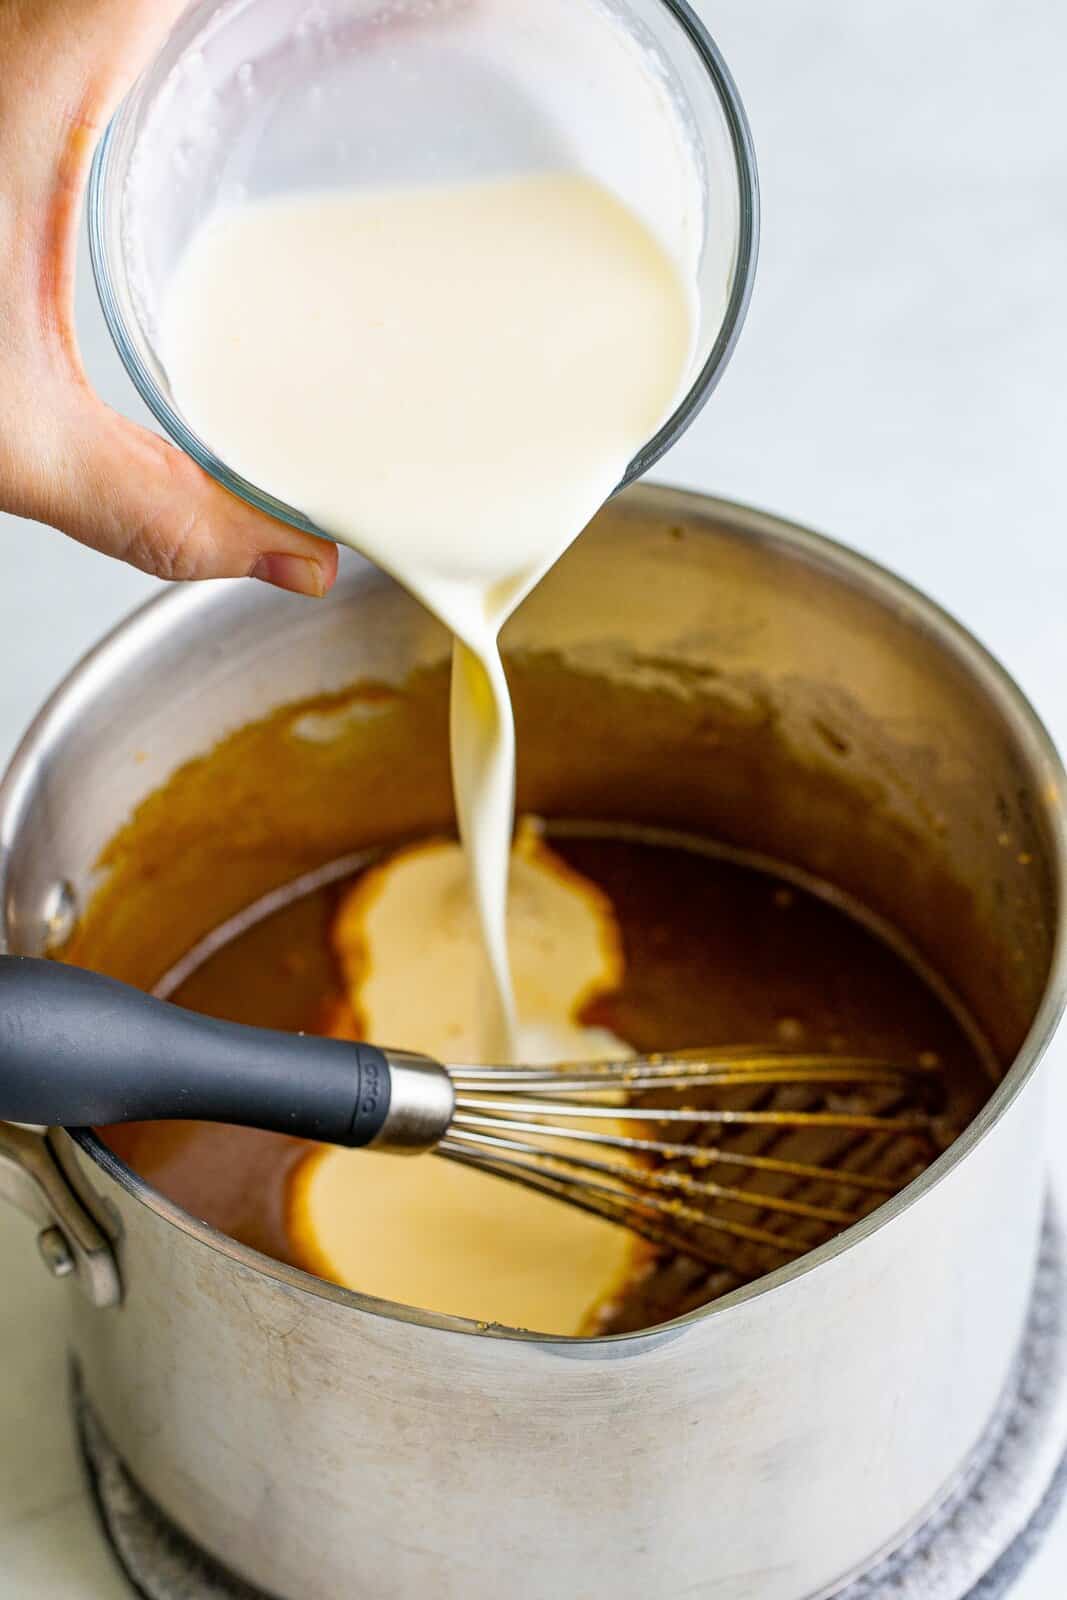 Evaporated milk and heavy cream added to melted brown sugar butter mixture.